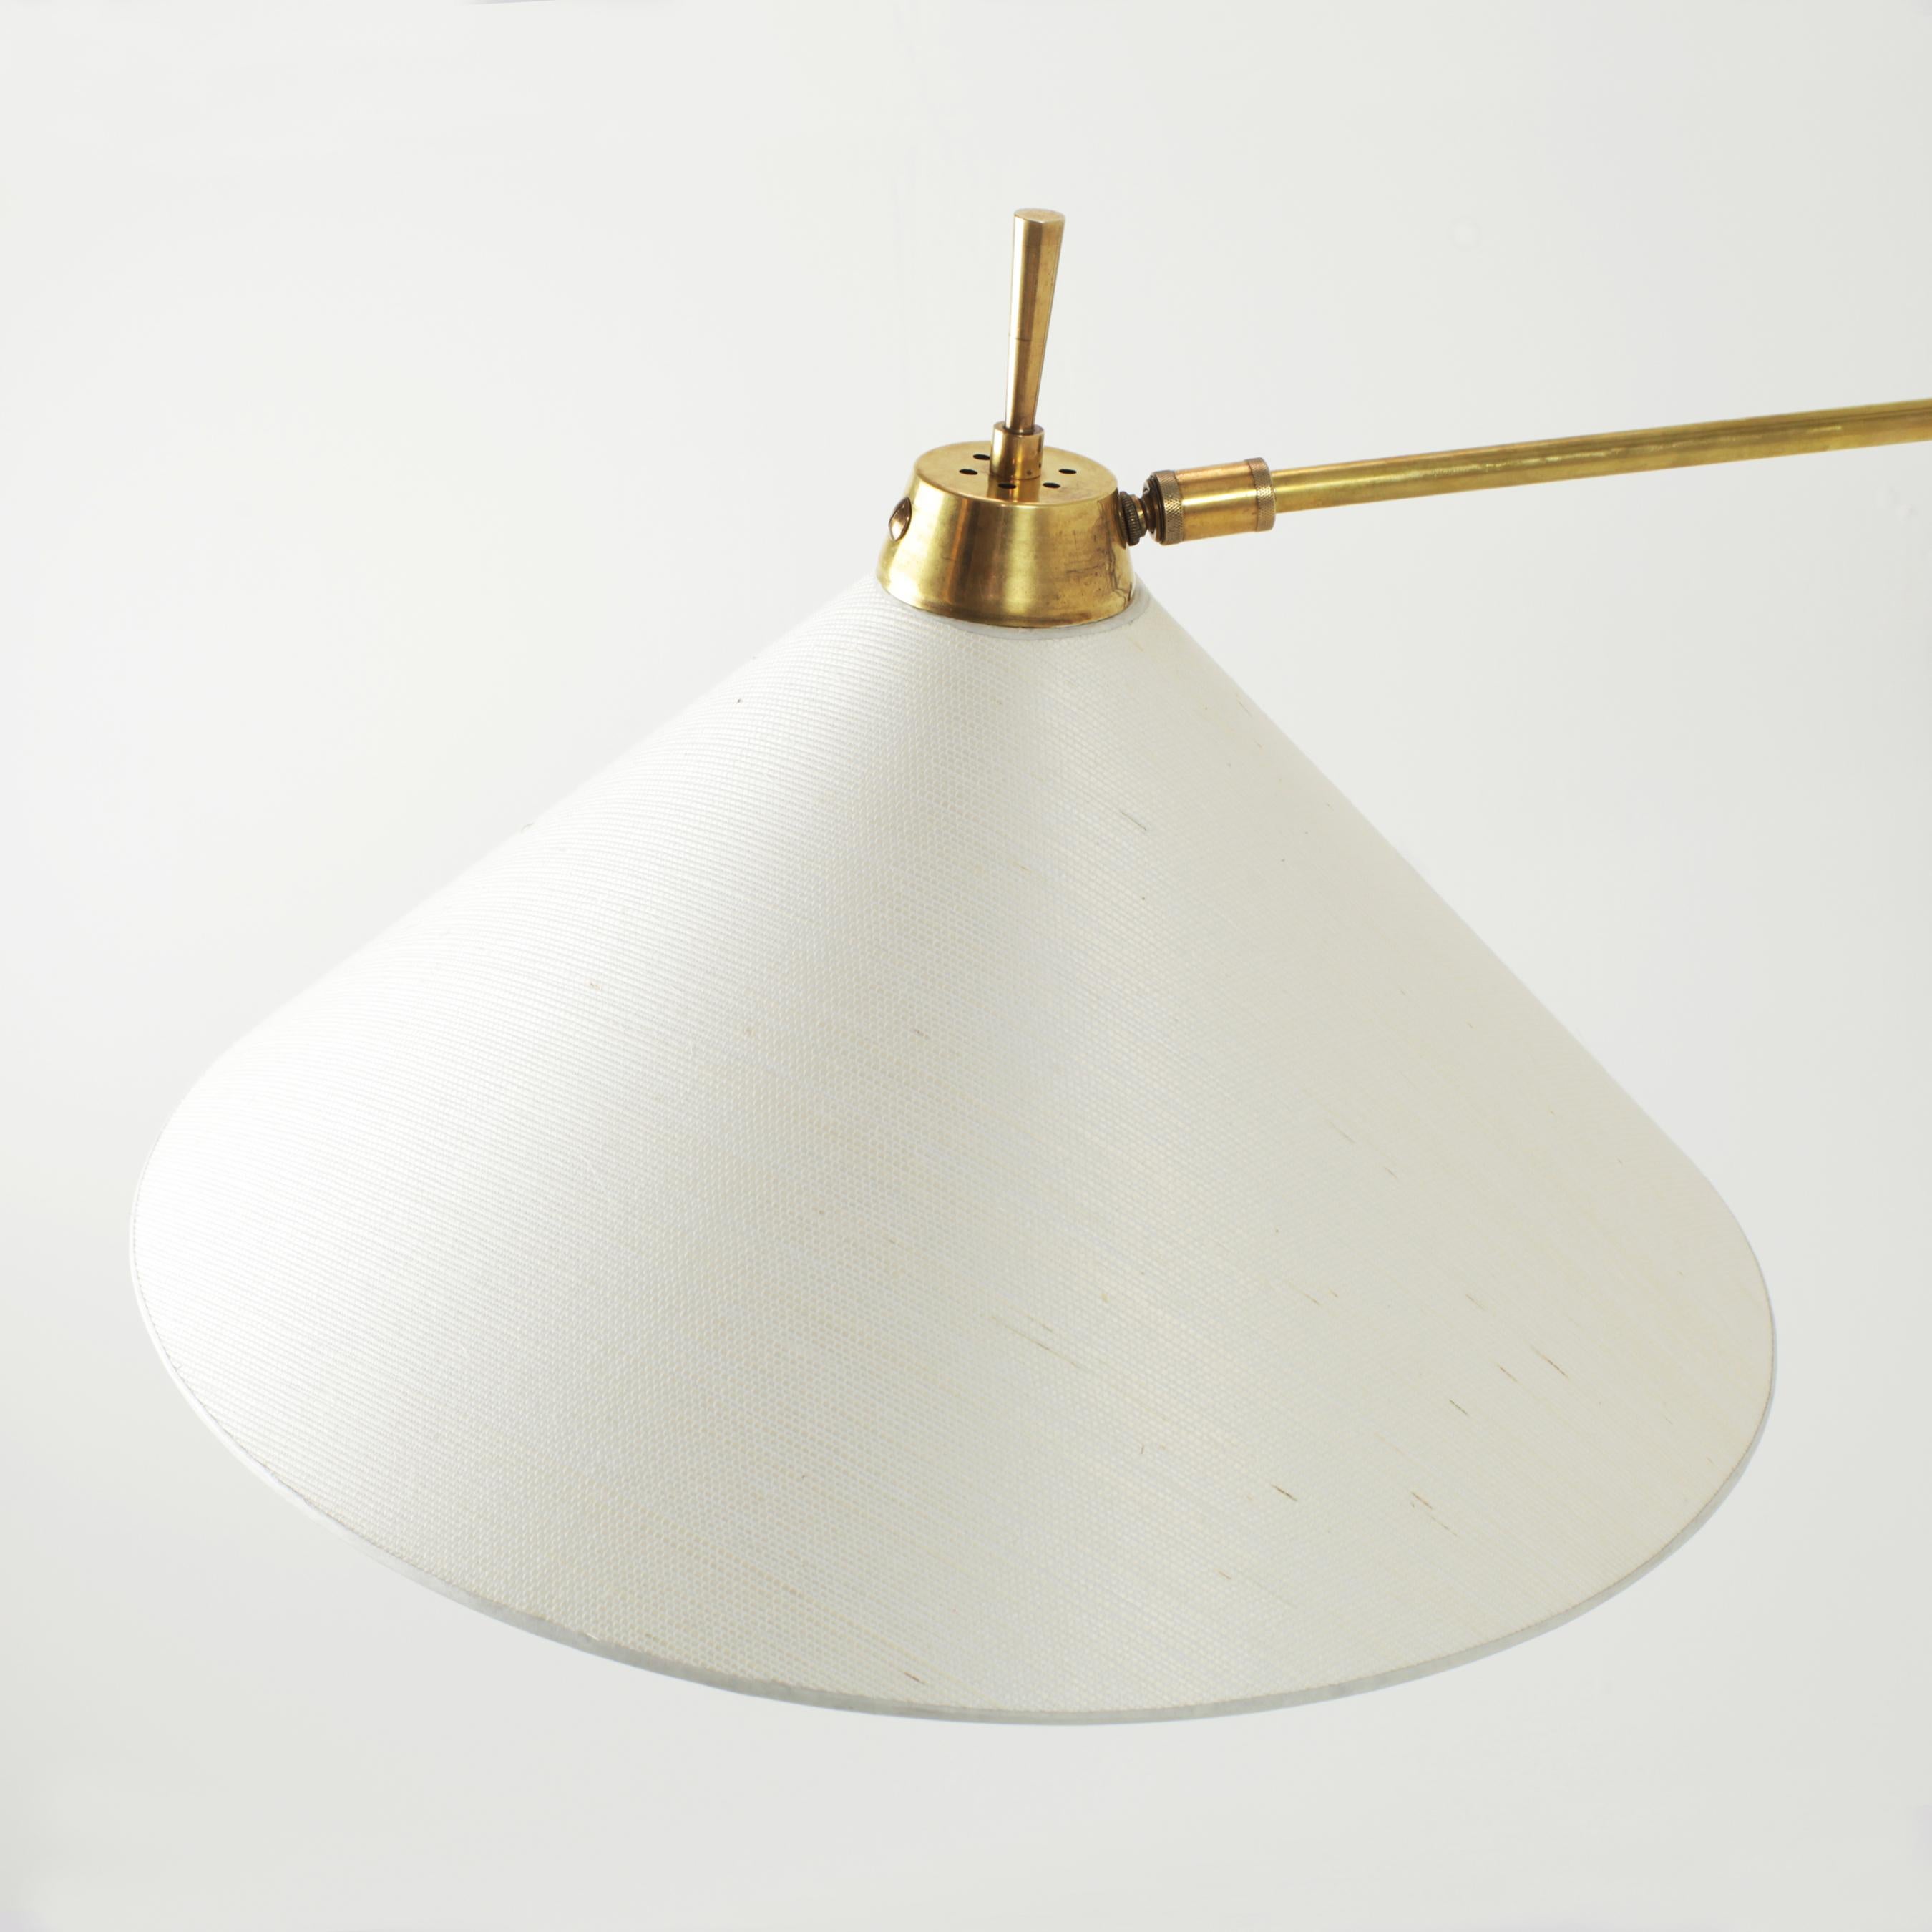 Mid-20th Century French Brass and Steel Swing Arm Wall Lamp, 1950